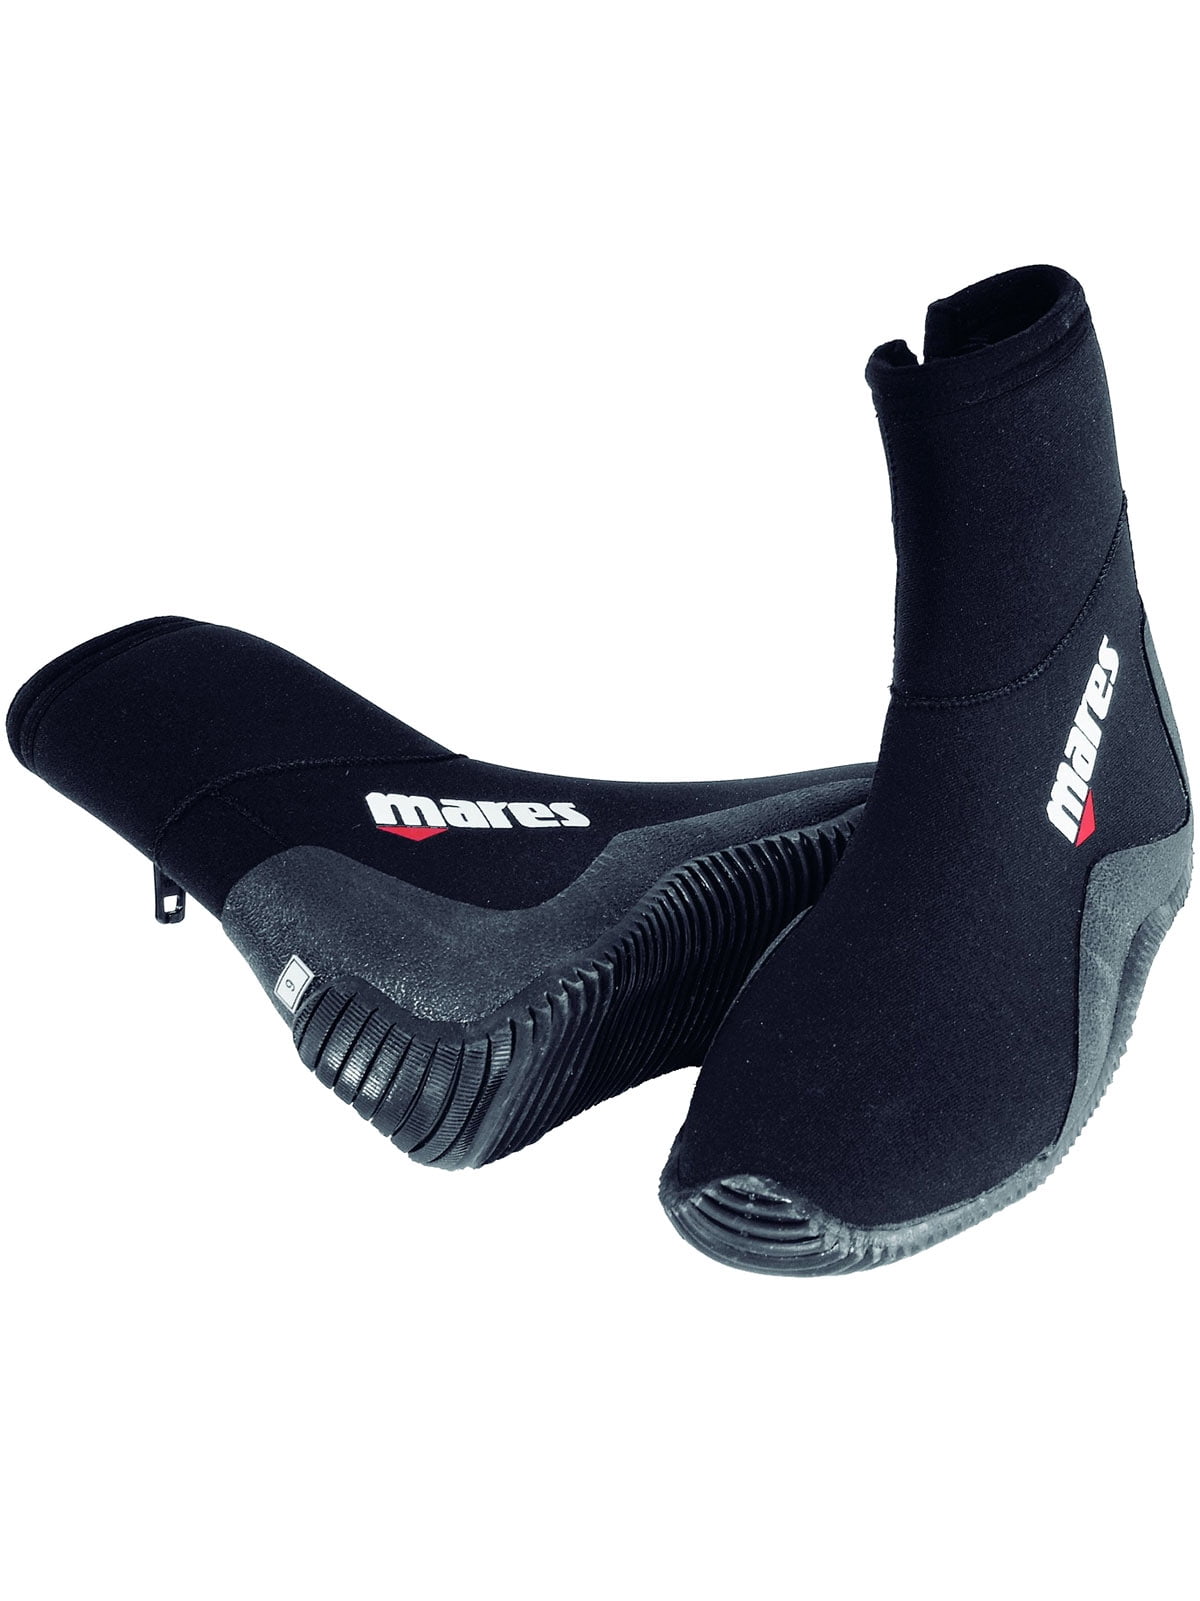 Mares 5mm Trilastic Dive Boot